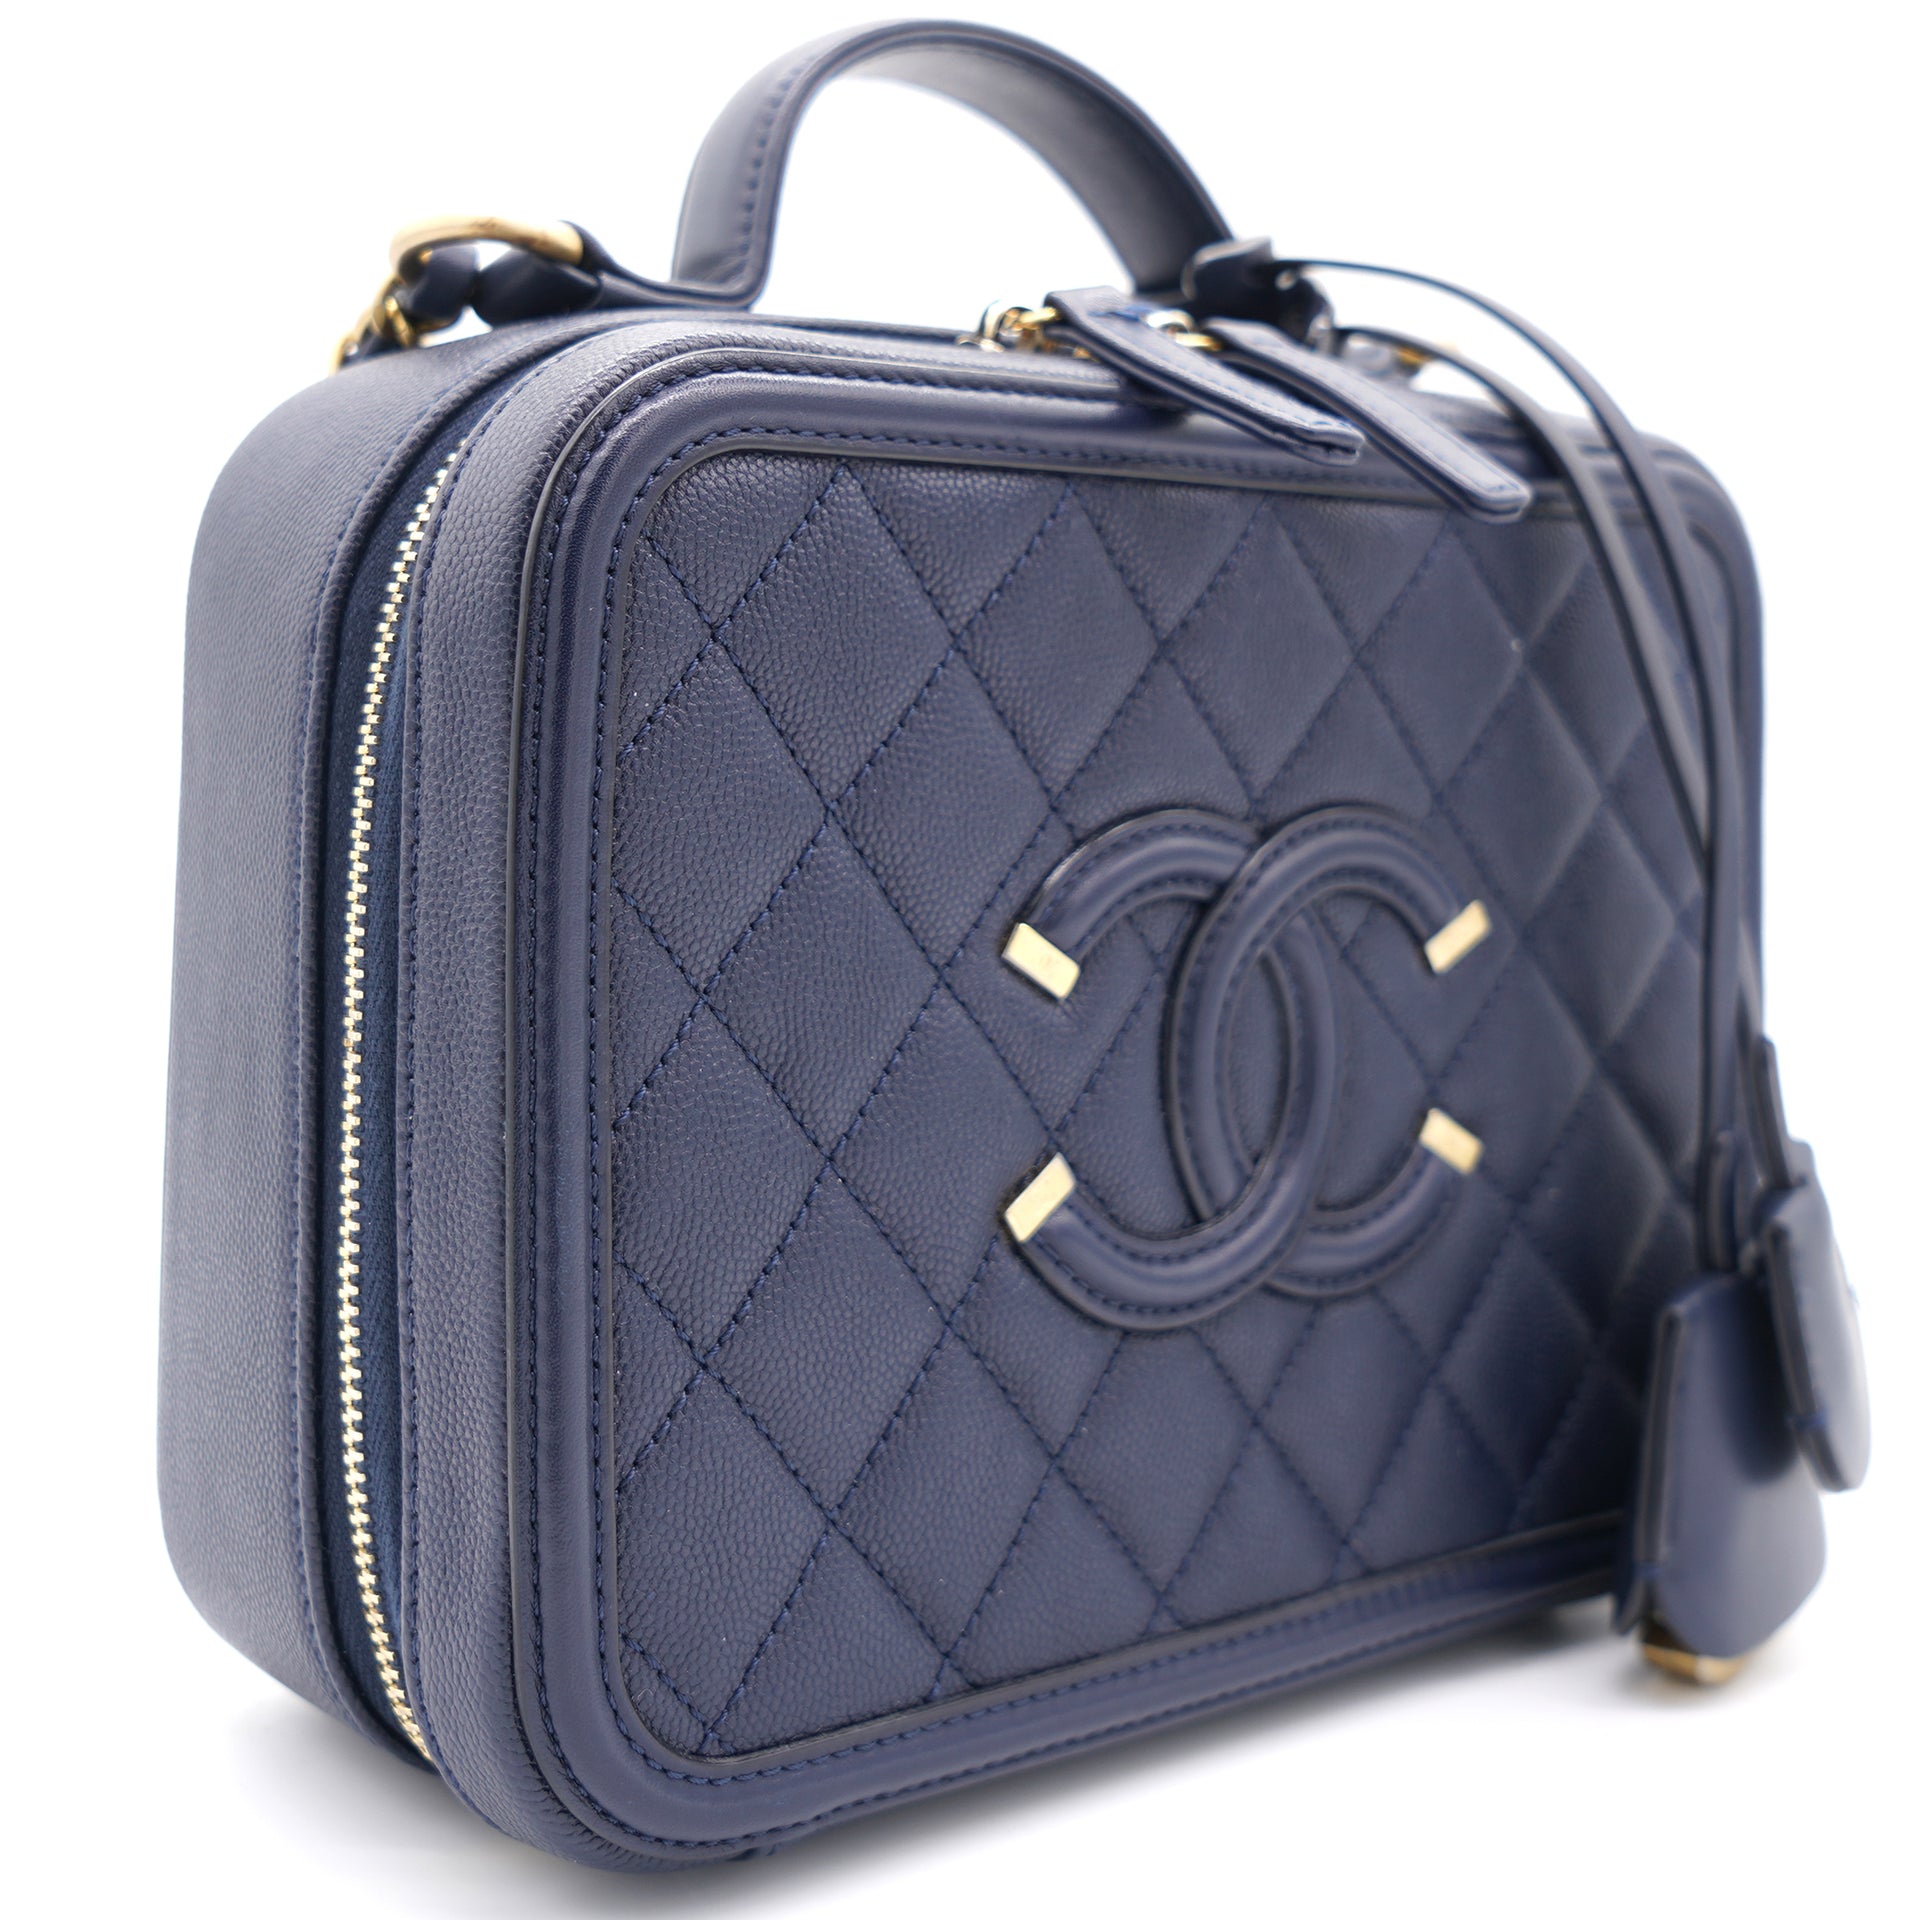 Chanel Navy Quilted Caviar Leather Medium CC Filigree Vanity Case